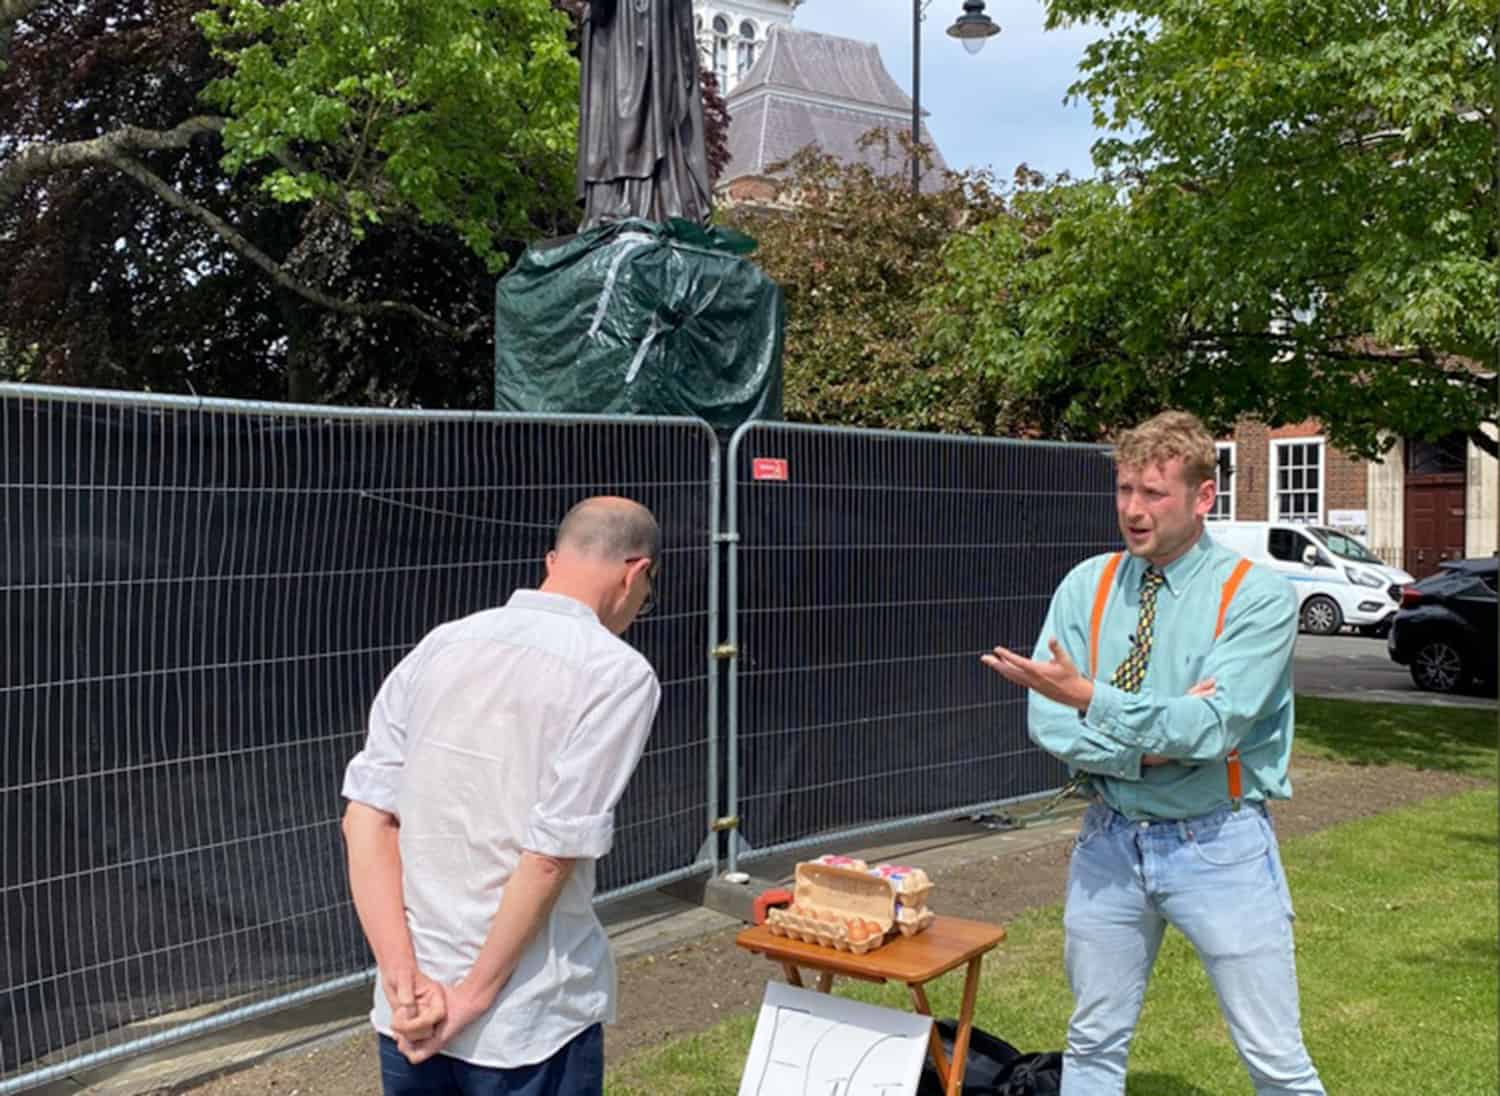 Man spotted selling eggs outside Margaret Thatcher statue